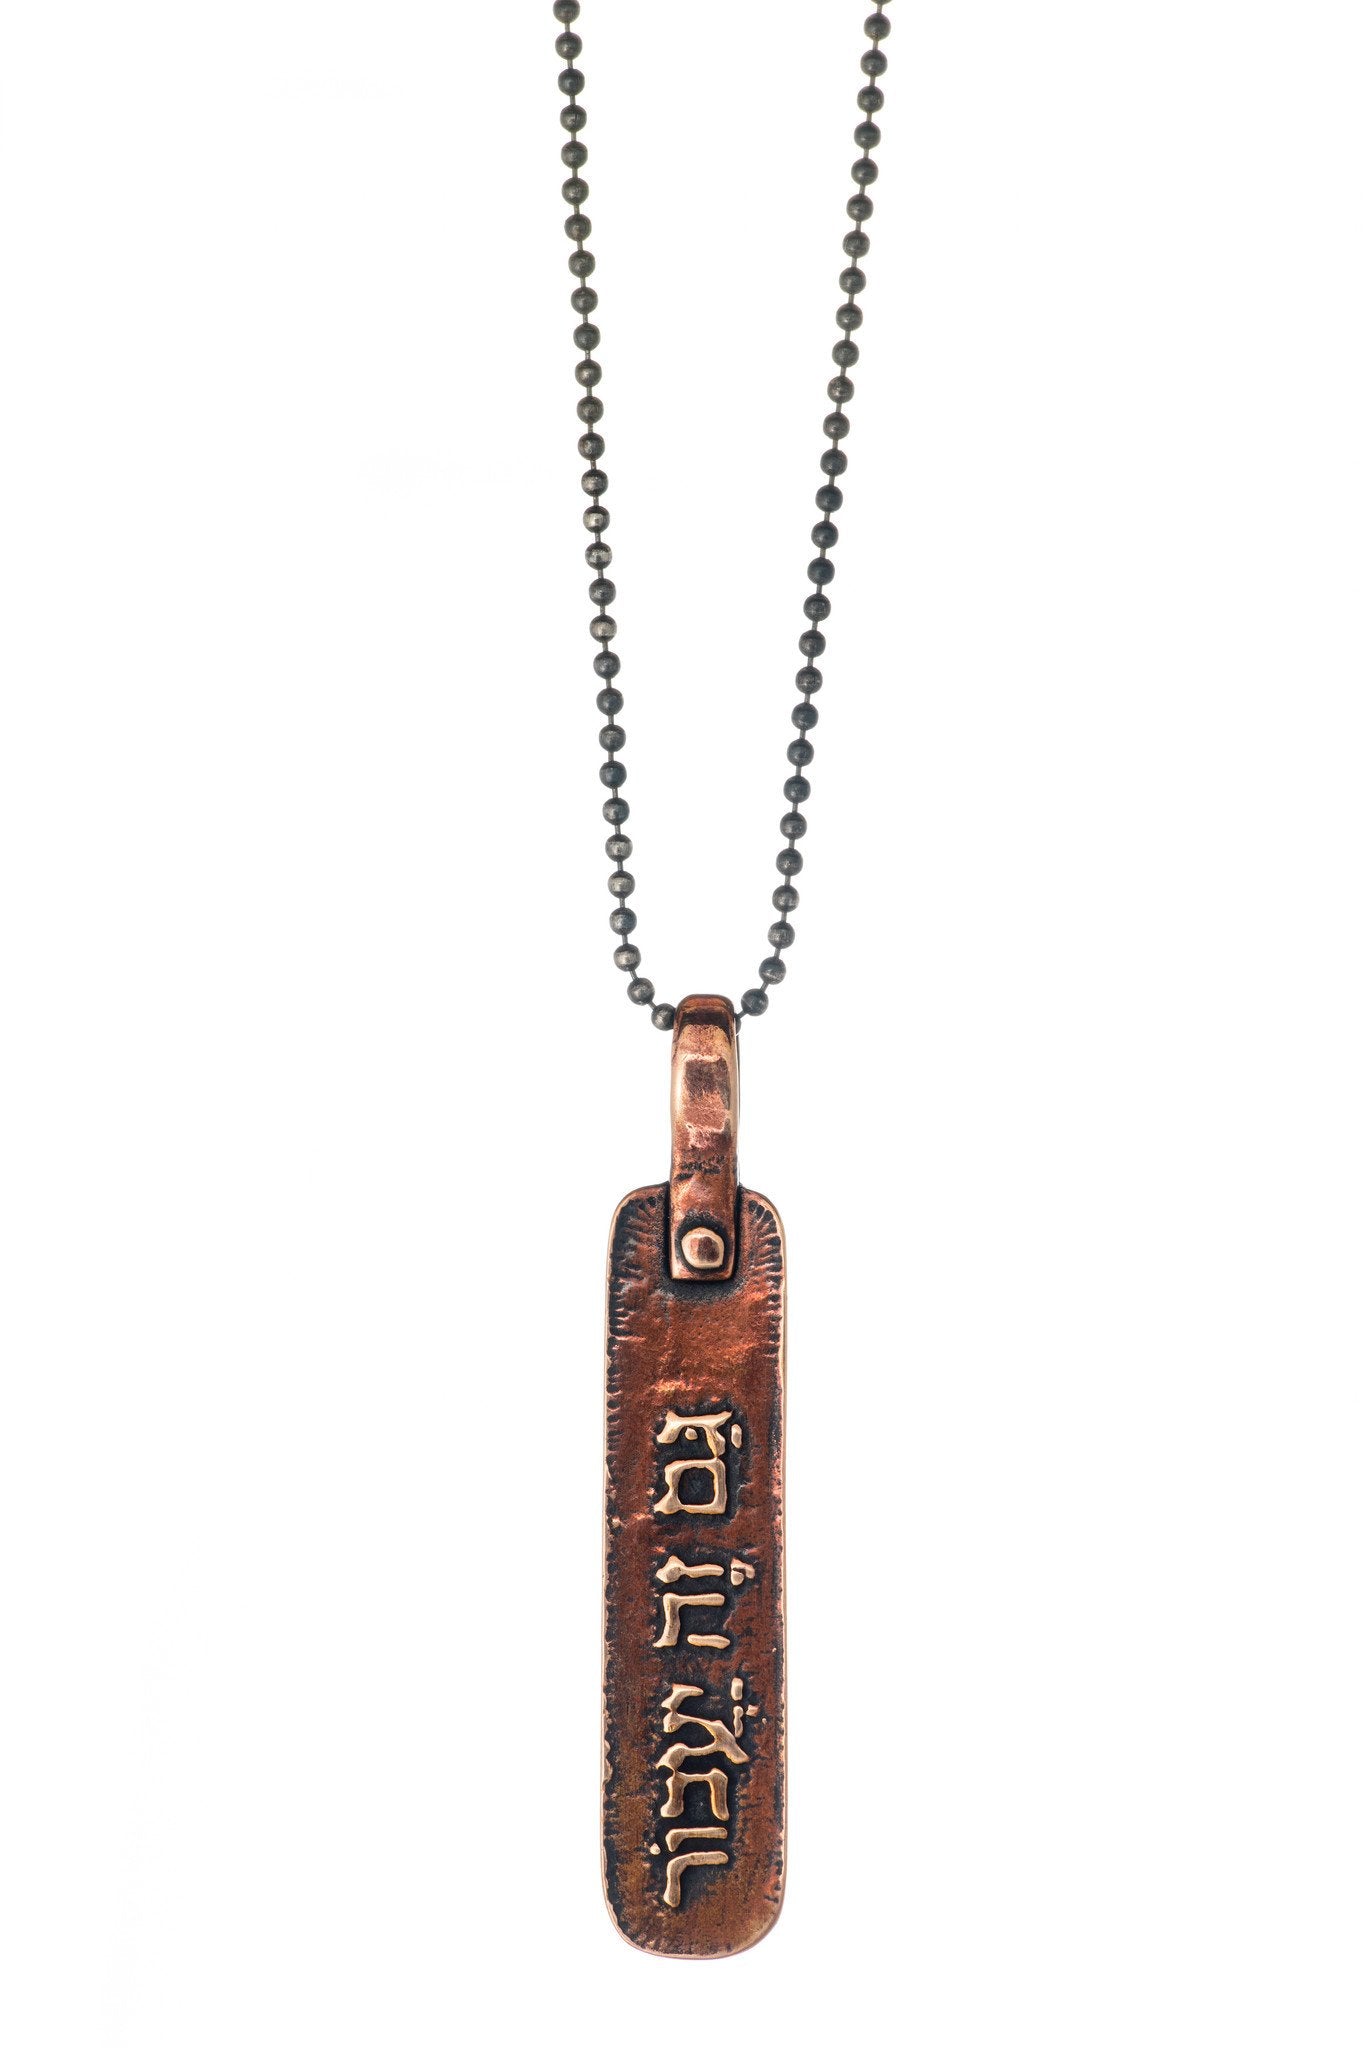 Marla Studio Necklaces This Too Shall Pass Necklace by Marla Studio